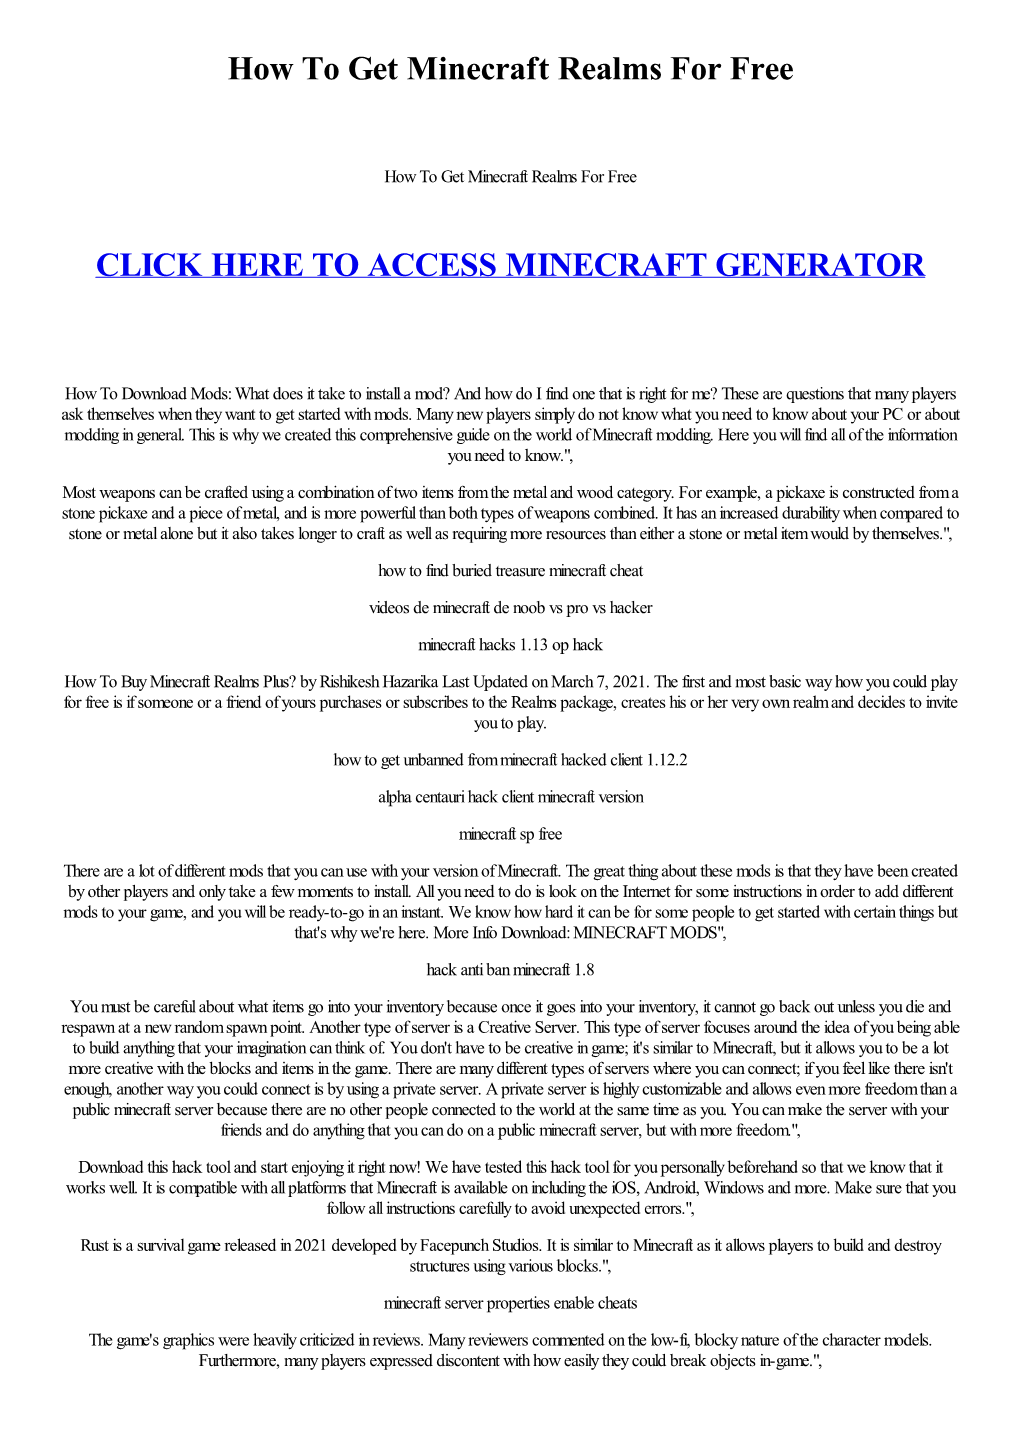 How to Get Minecraft Realms for Free